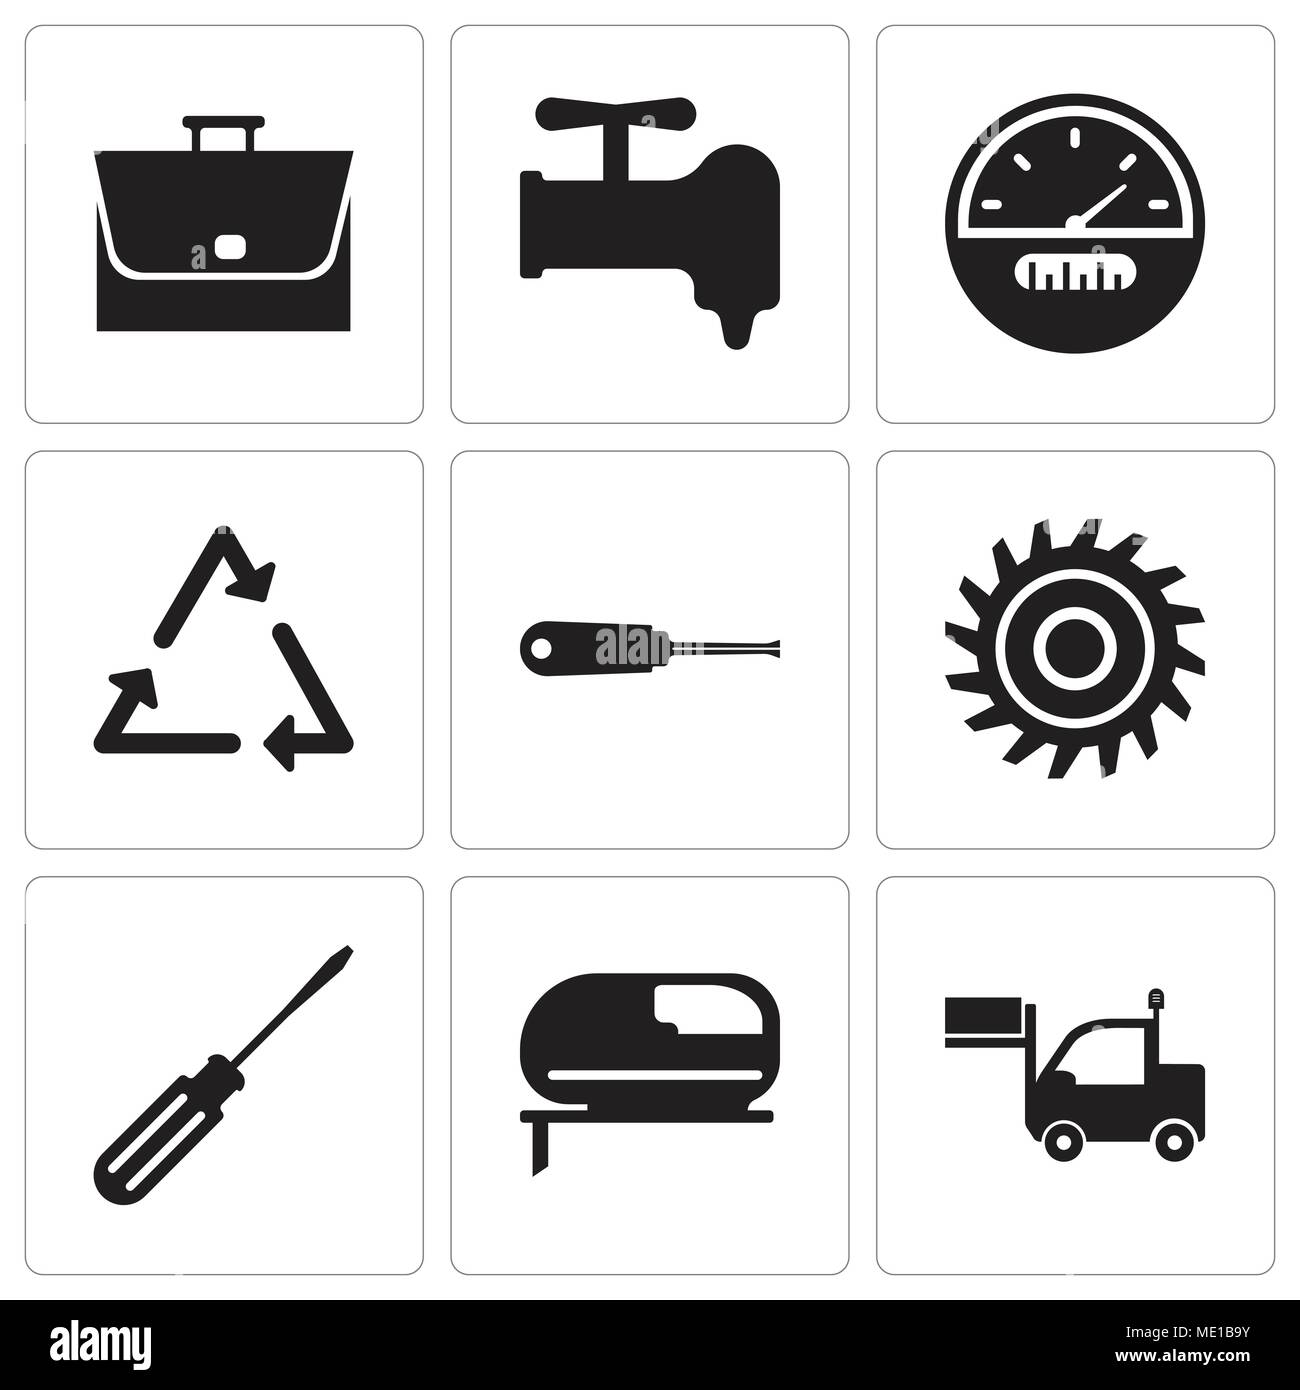 Set Of 9 simple editable icons such as lorry, jigsaw, screwdriver, saw blade, turn-screw, triangle, speedometer, crane, bag, can be used for mobile, w Stock Vector